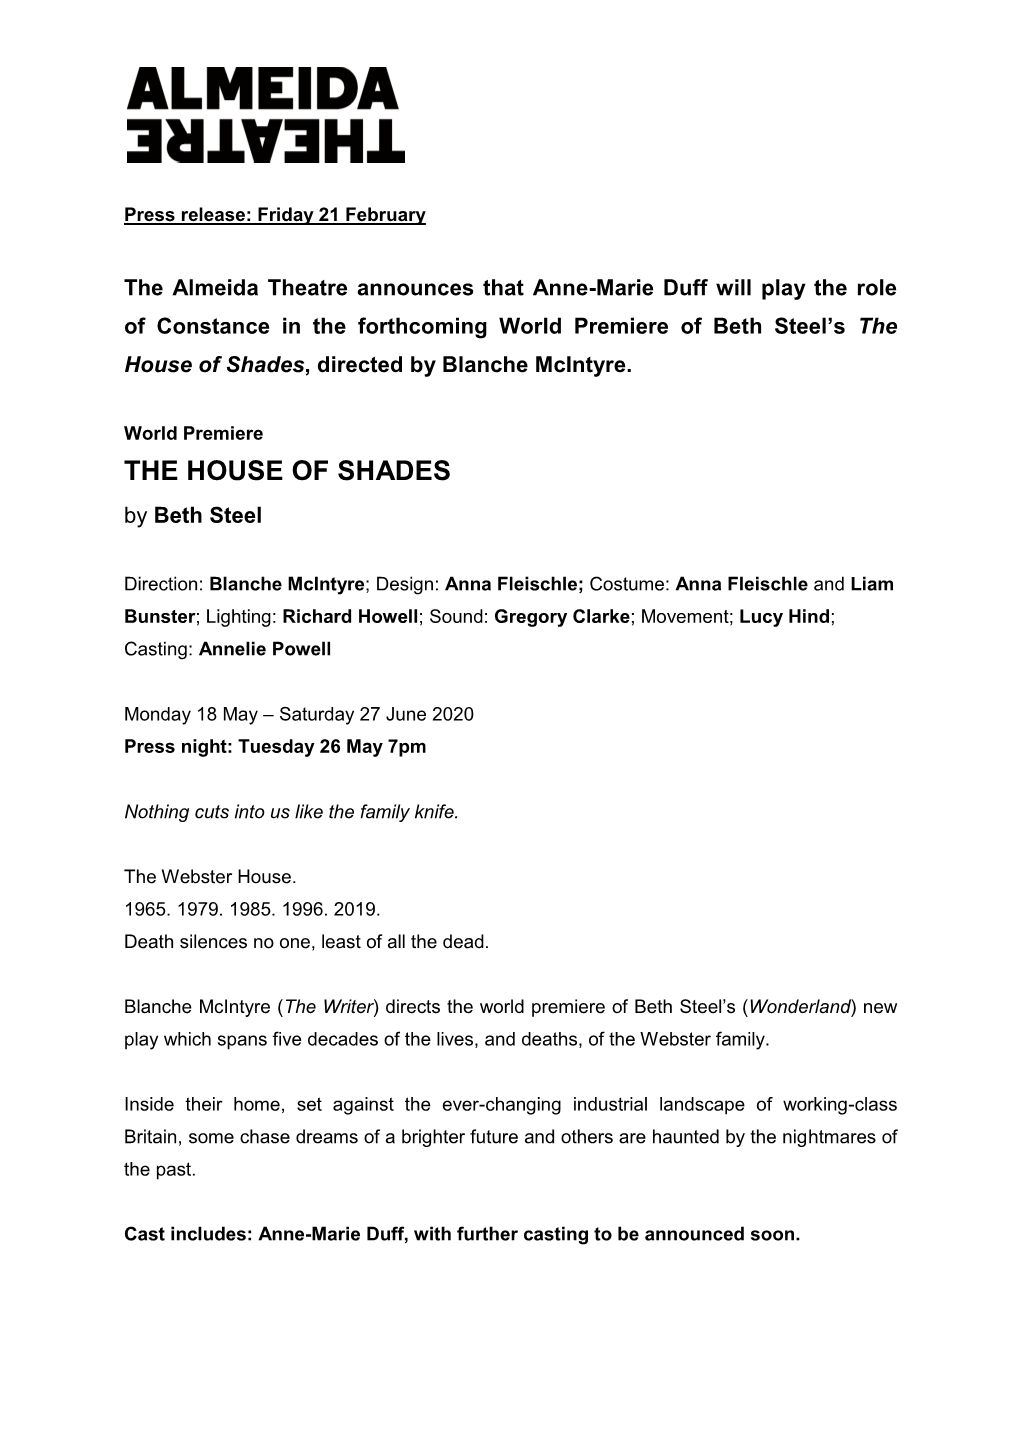 Anne-Marie Duff Cast in the House of Shades